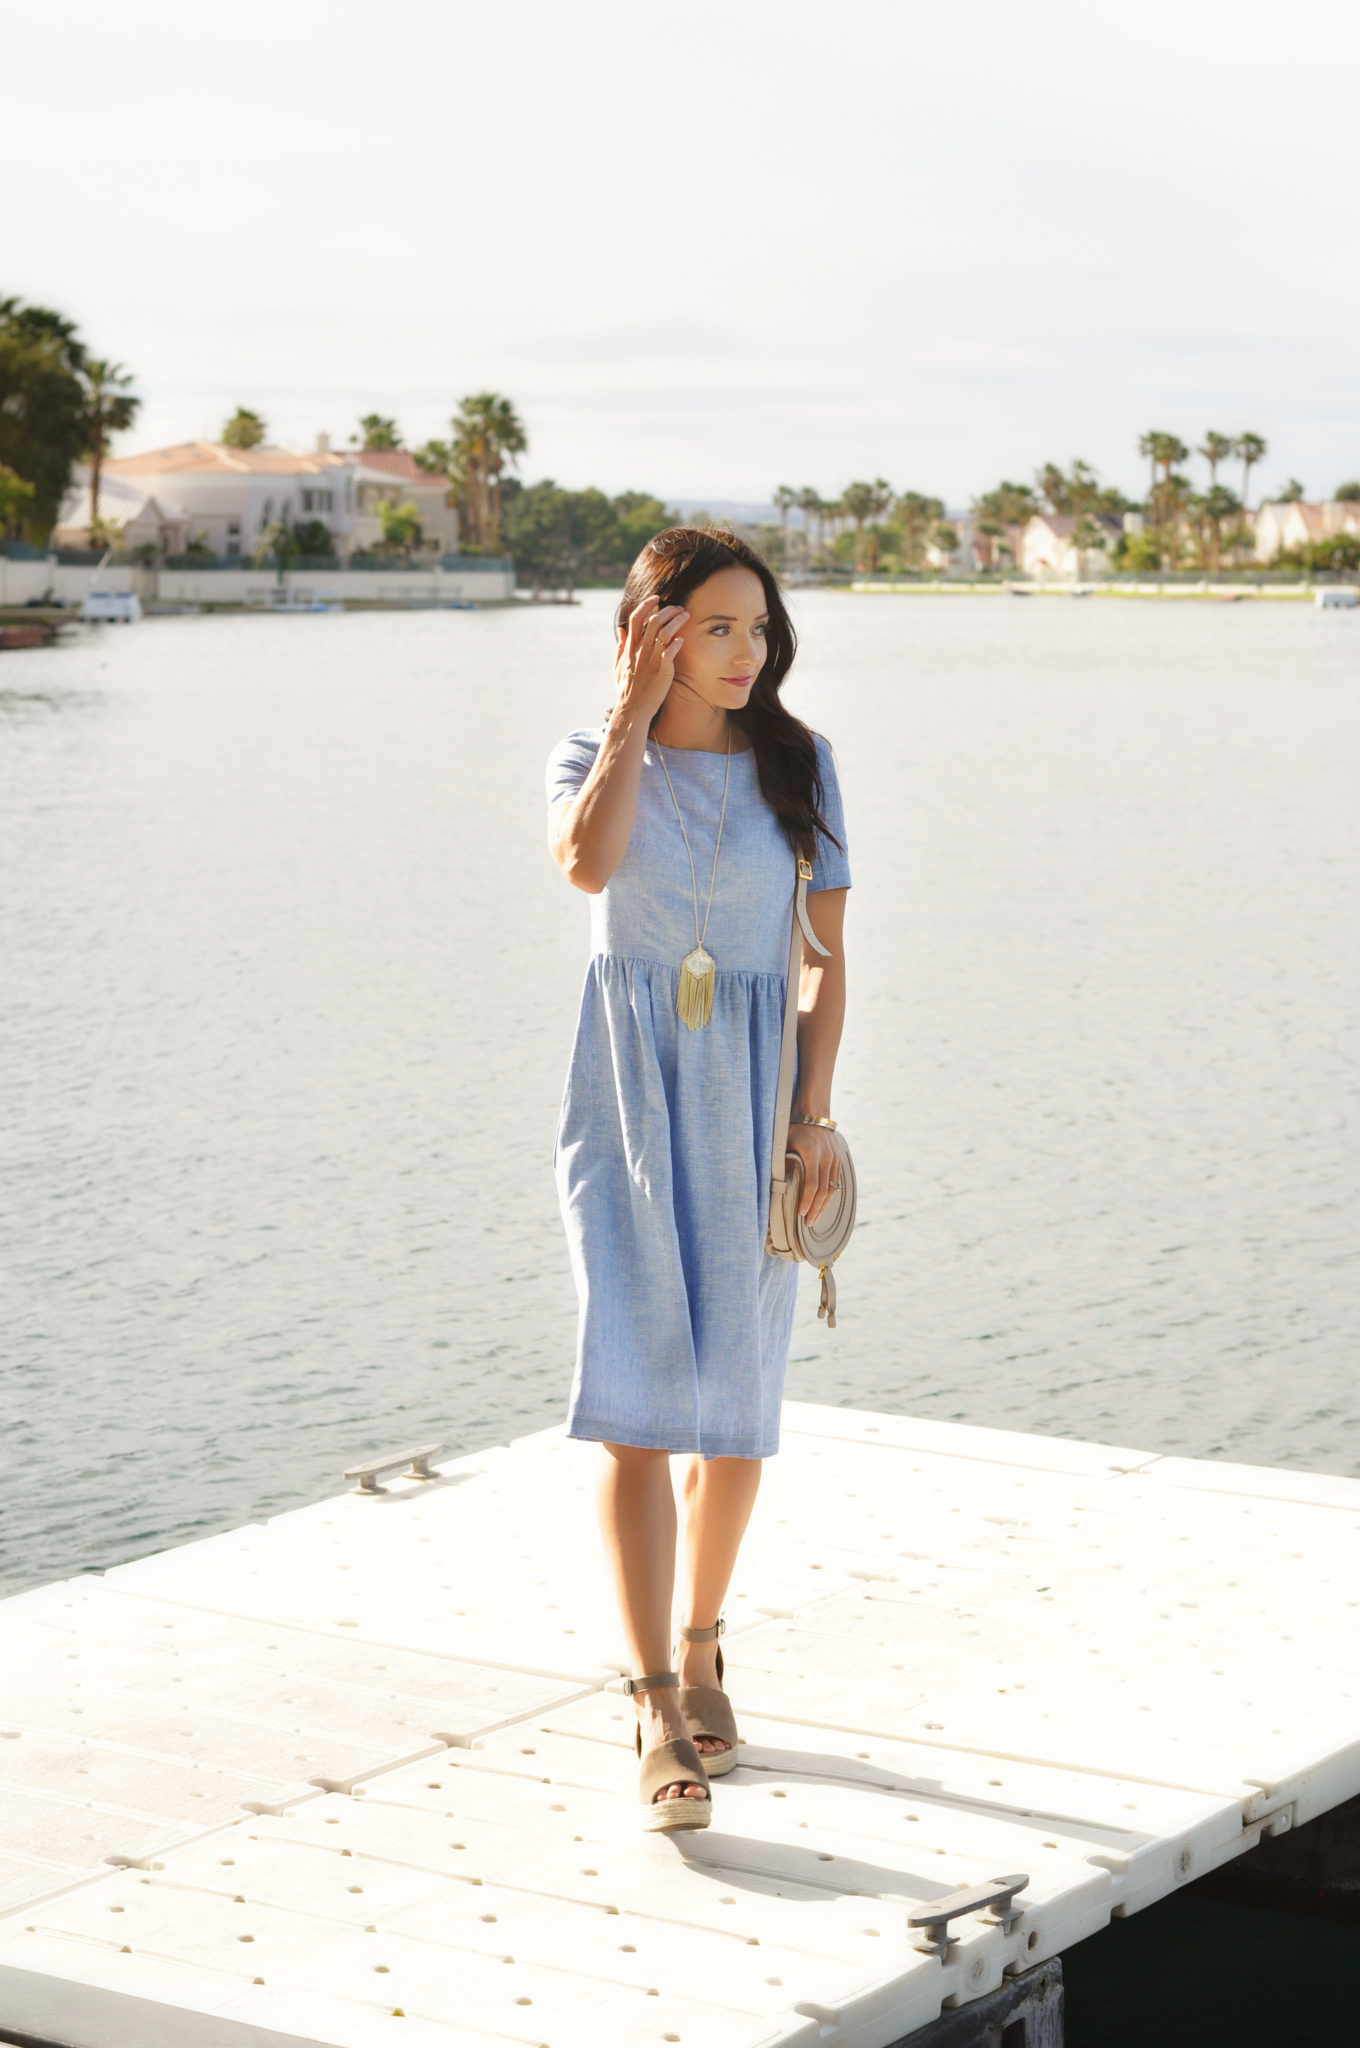 Cute Spring Outfits featured by top US fashion blog Outfits & Outings; Image of a woman wearing blue dress and sandals.